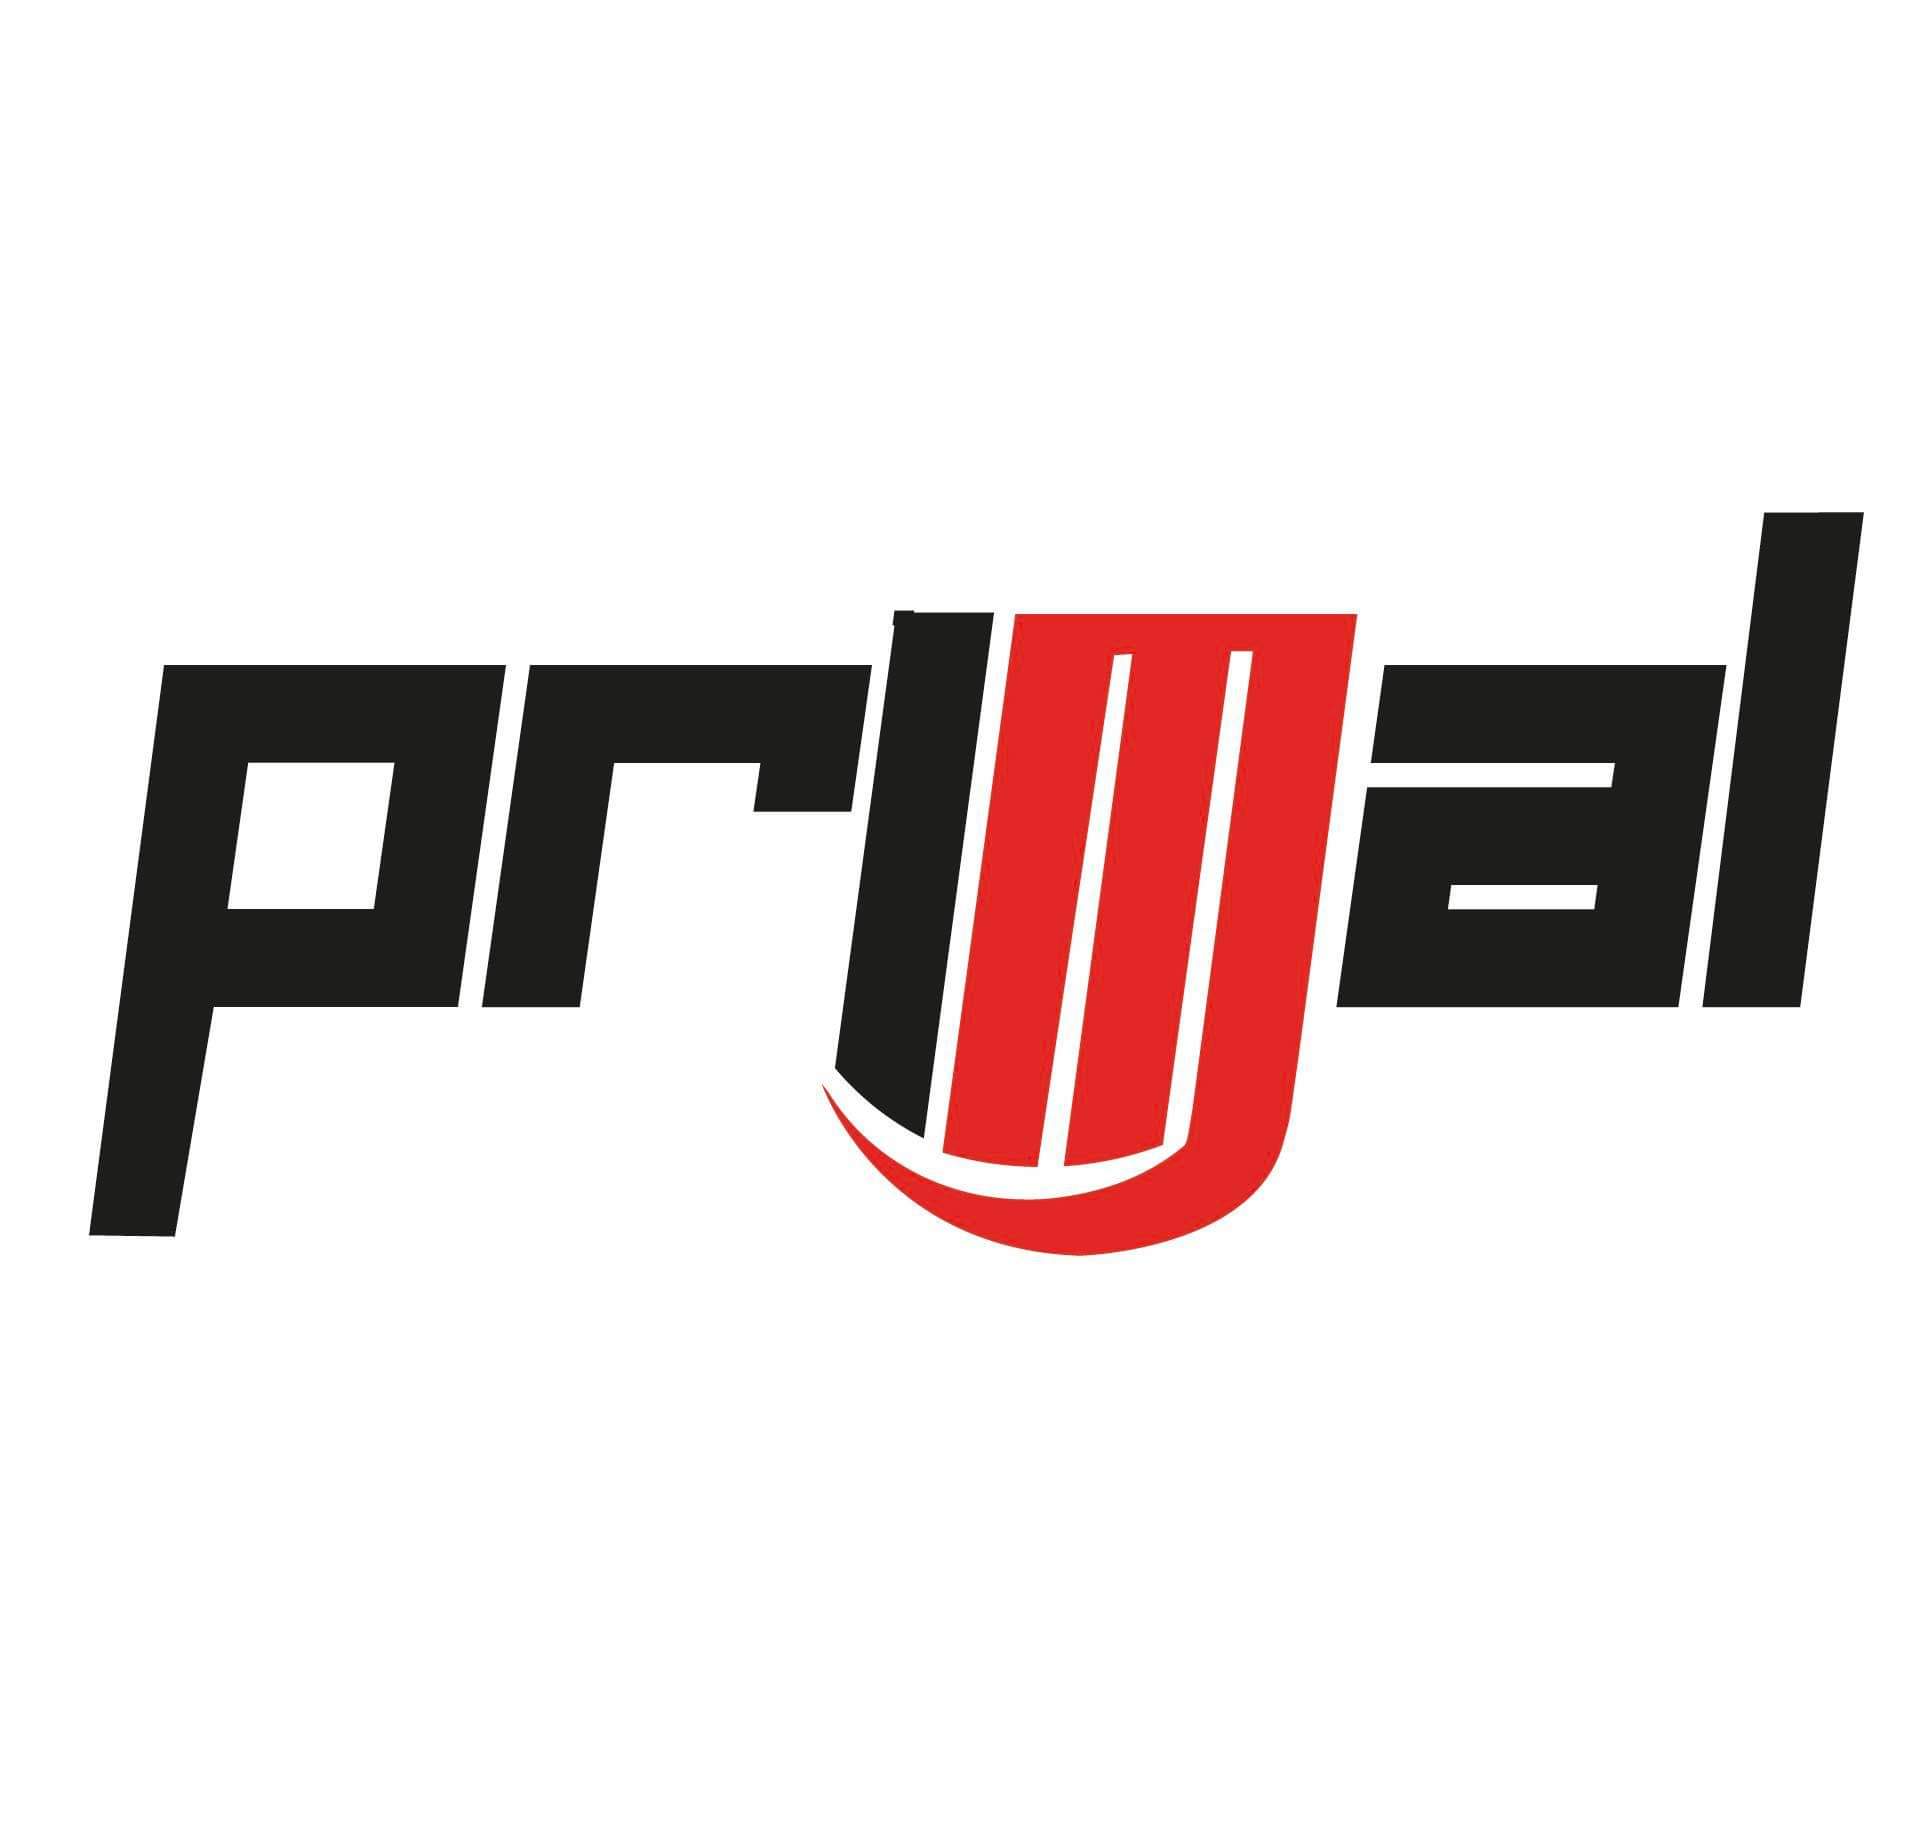 Primal grappling academy